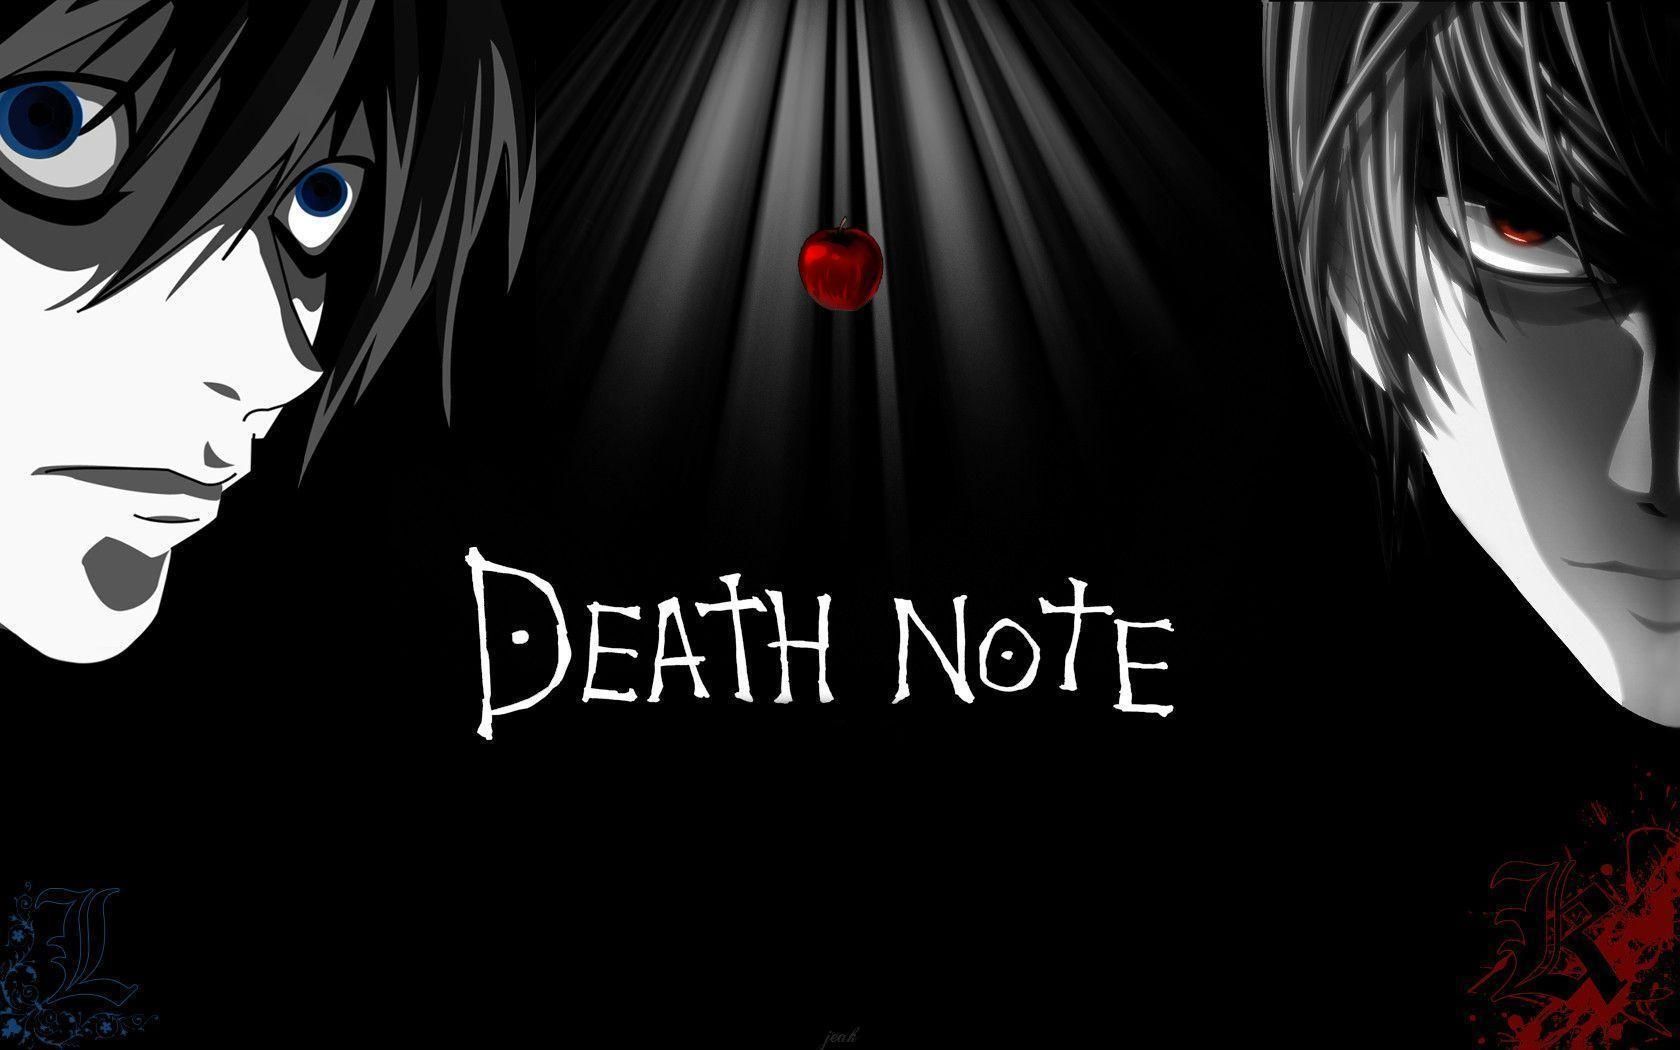 Netflix Announces Death Note Live-Action Series With Duffer Brothers